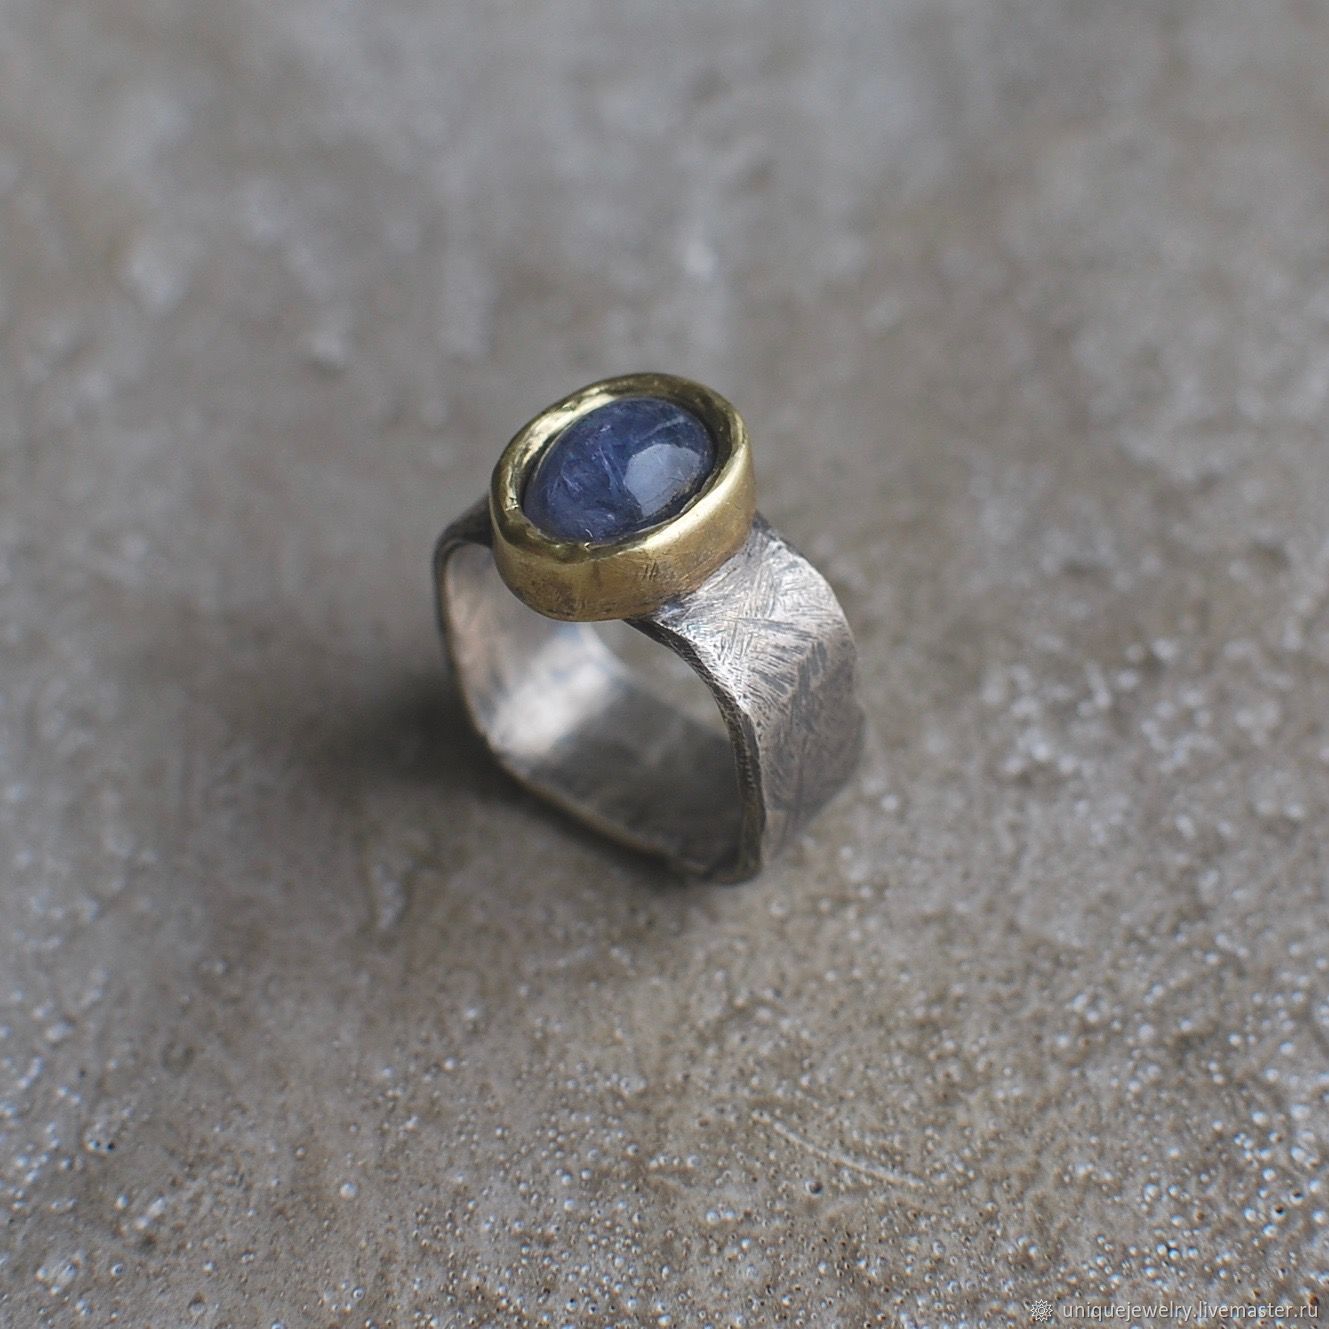 Ring with tanzanite, silver and brass, Rings, Moscow,  Фото №1